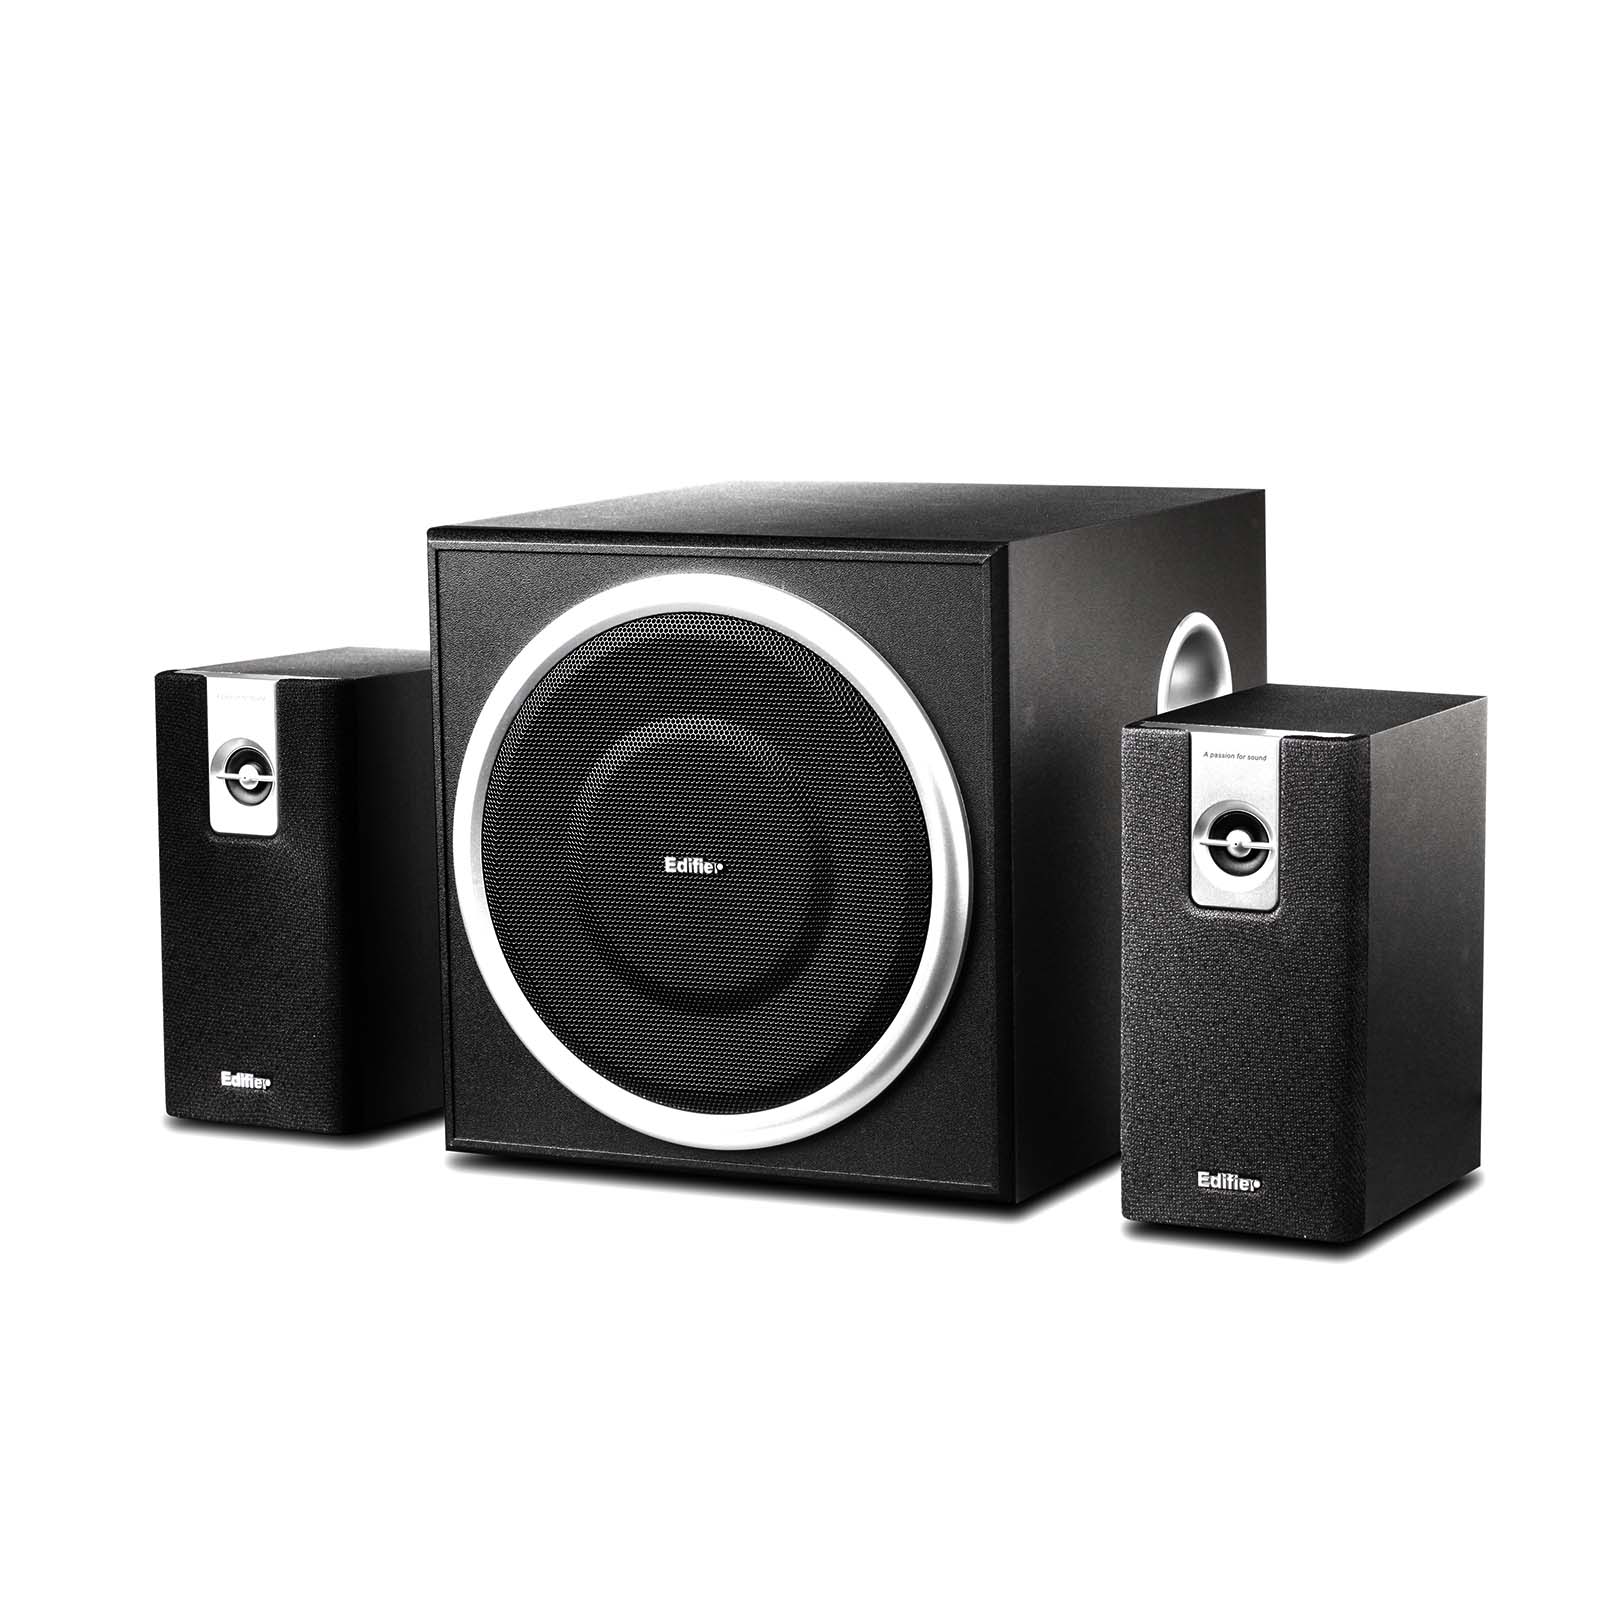 P3080M - Speakers with USB Drive Input 